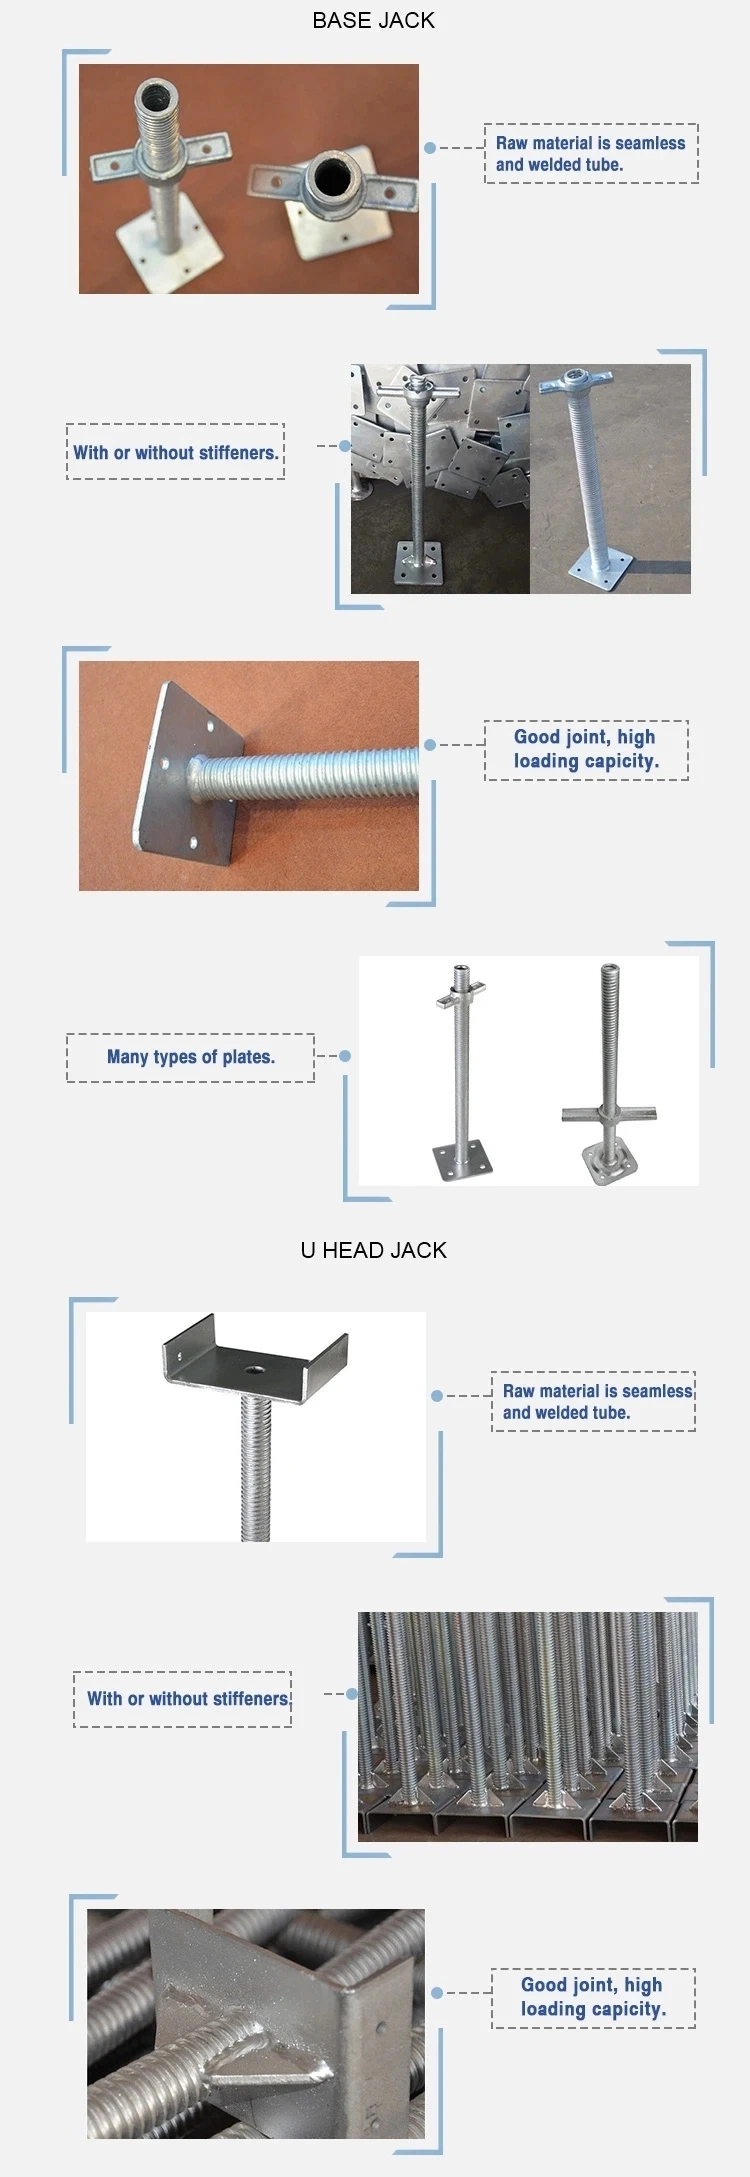 China Supplier Hot Dipped Galvanized Hollow Square and U-Head Scaffold Screw and Jack Base for Construction Size Can Be Customized